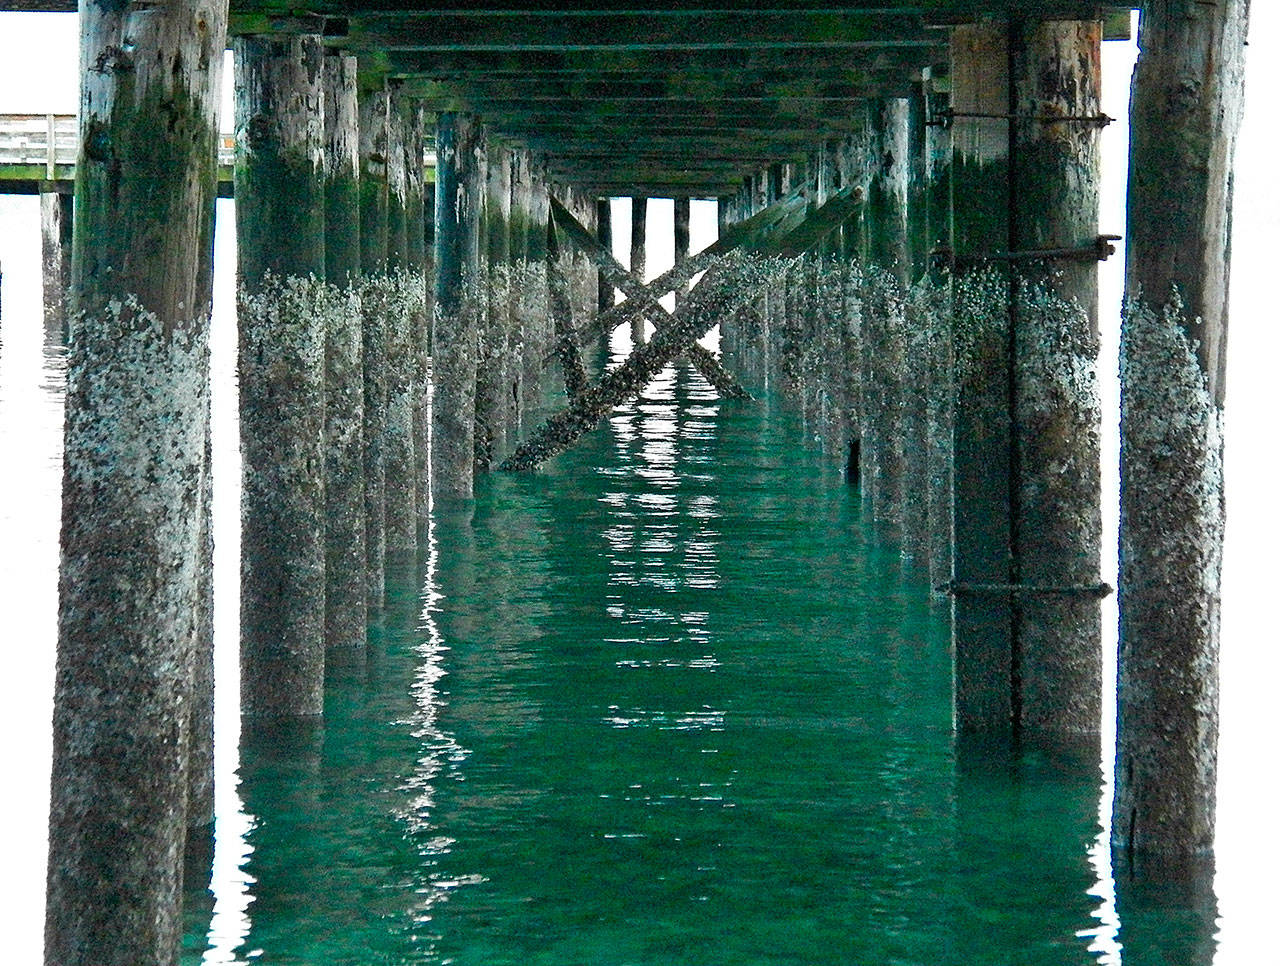 The pilings under the Tramp Harbor dock have been evaluated in recent years and were found to be deteriorating (Paul Rowley/Staff Photo).